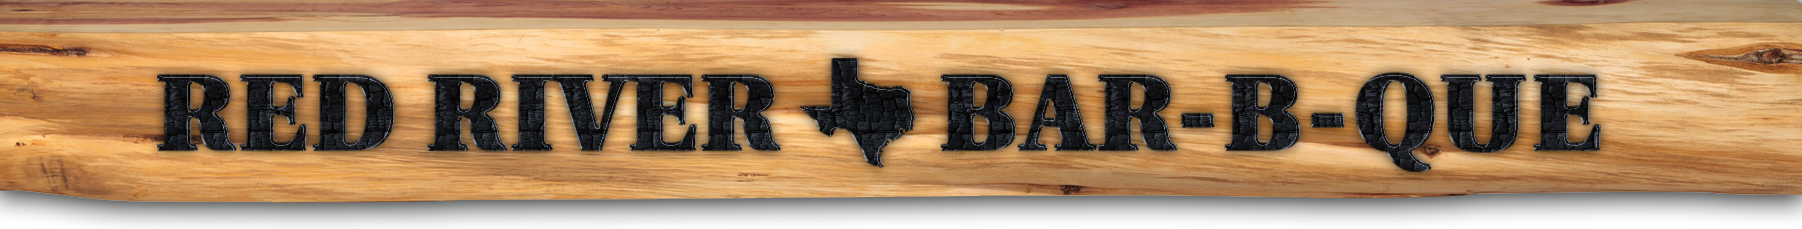 Red River BBQ Wood Background